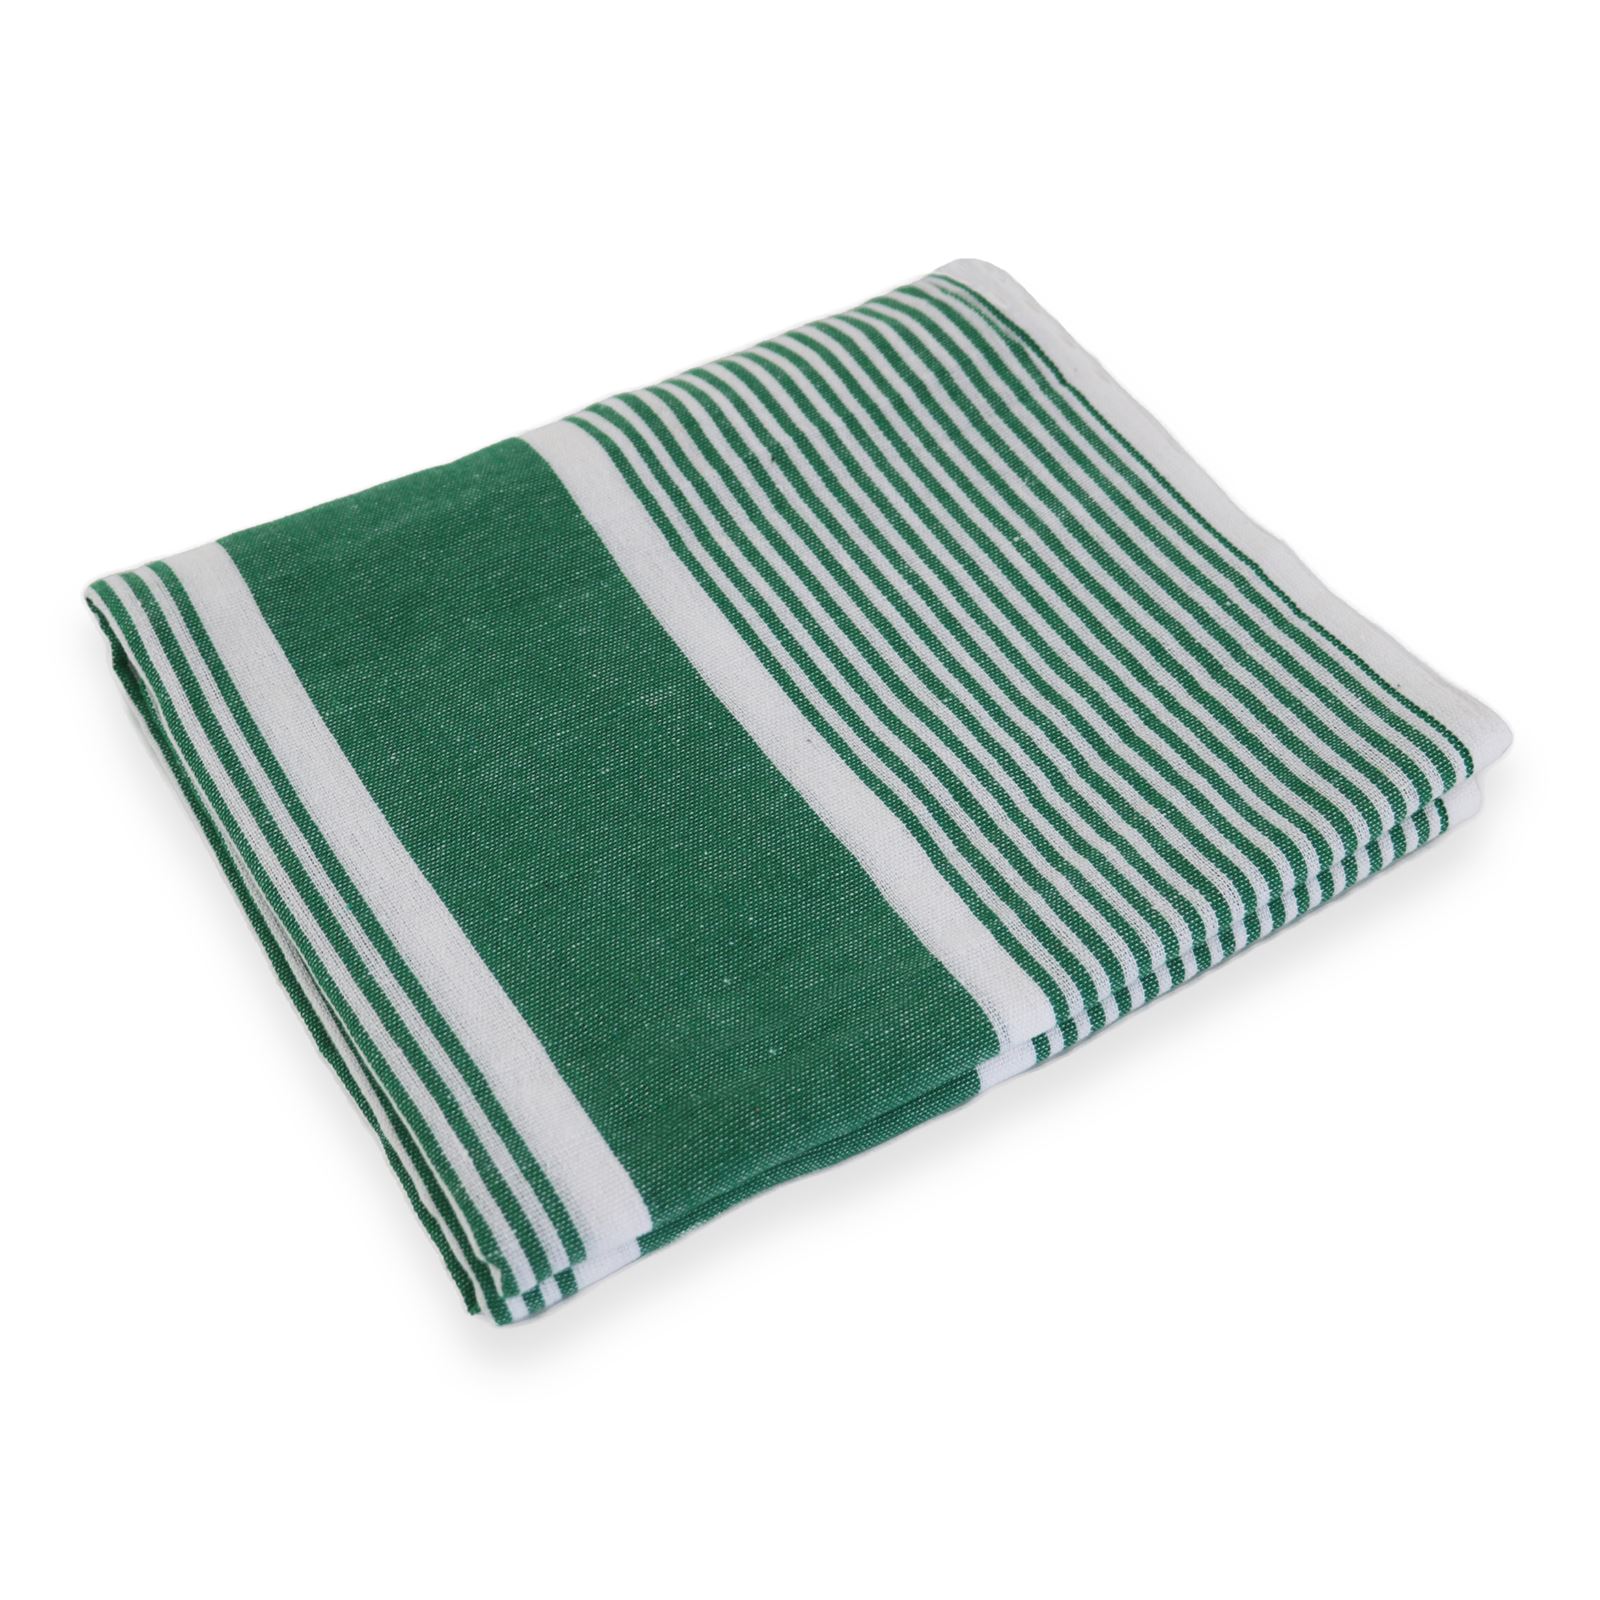 Green Handloom Cotton Bed Sheets 45x78 (Inches) for Single Beds